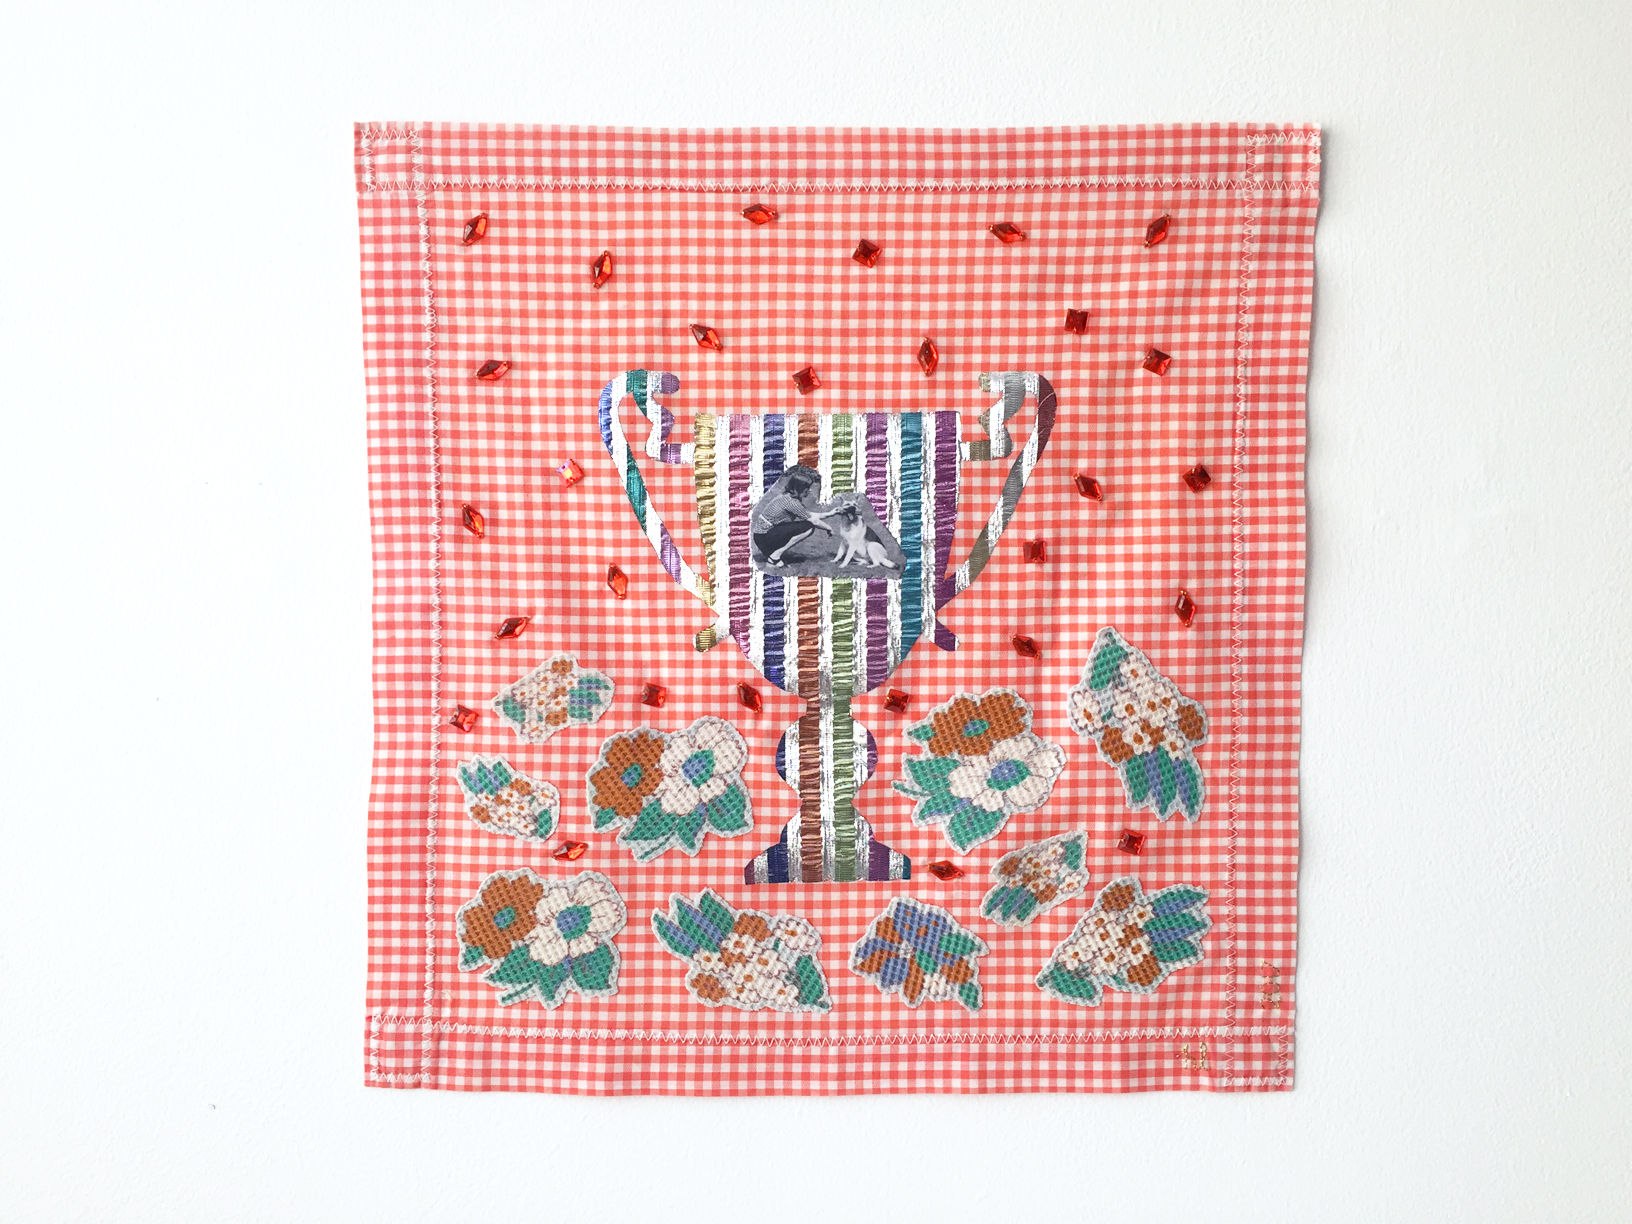 Number 1 Best Friend #1, 2017, textile object, found fabric on handmade cotton placemat, digital print on cotton, polyester, found plastic gems, 350mm x 365mm